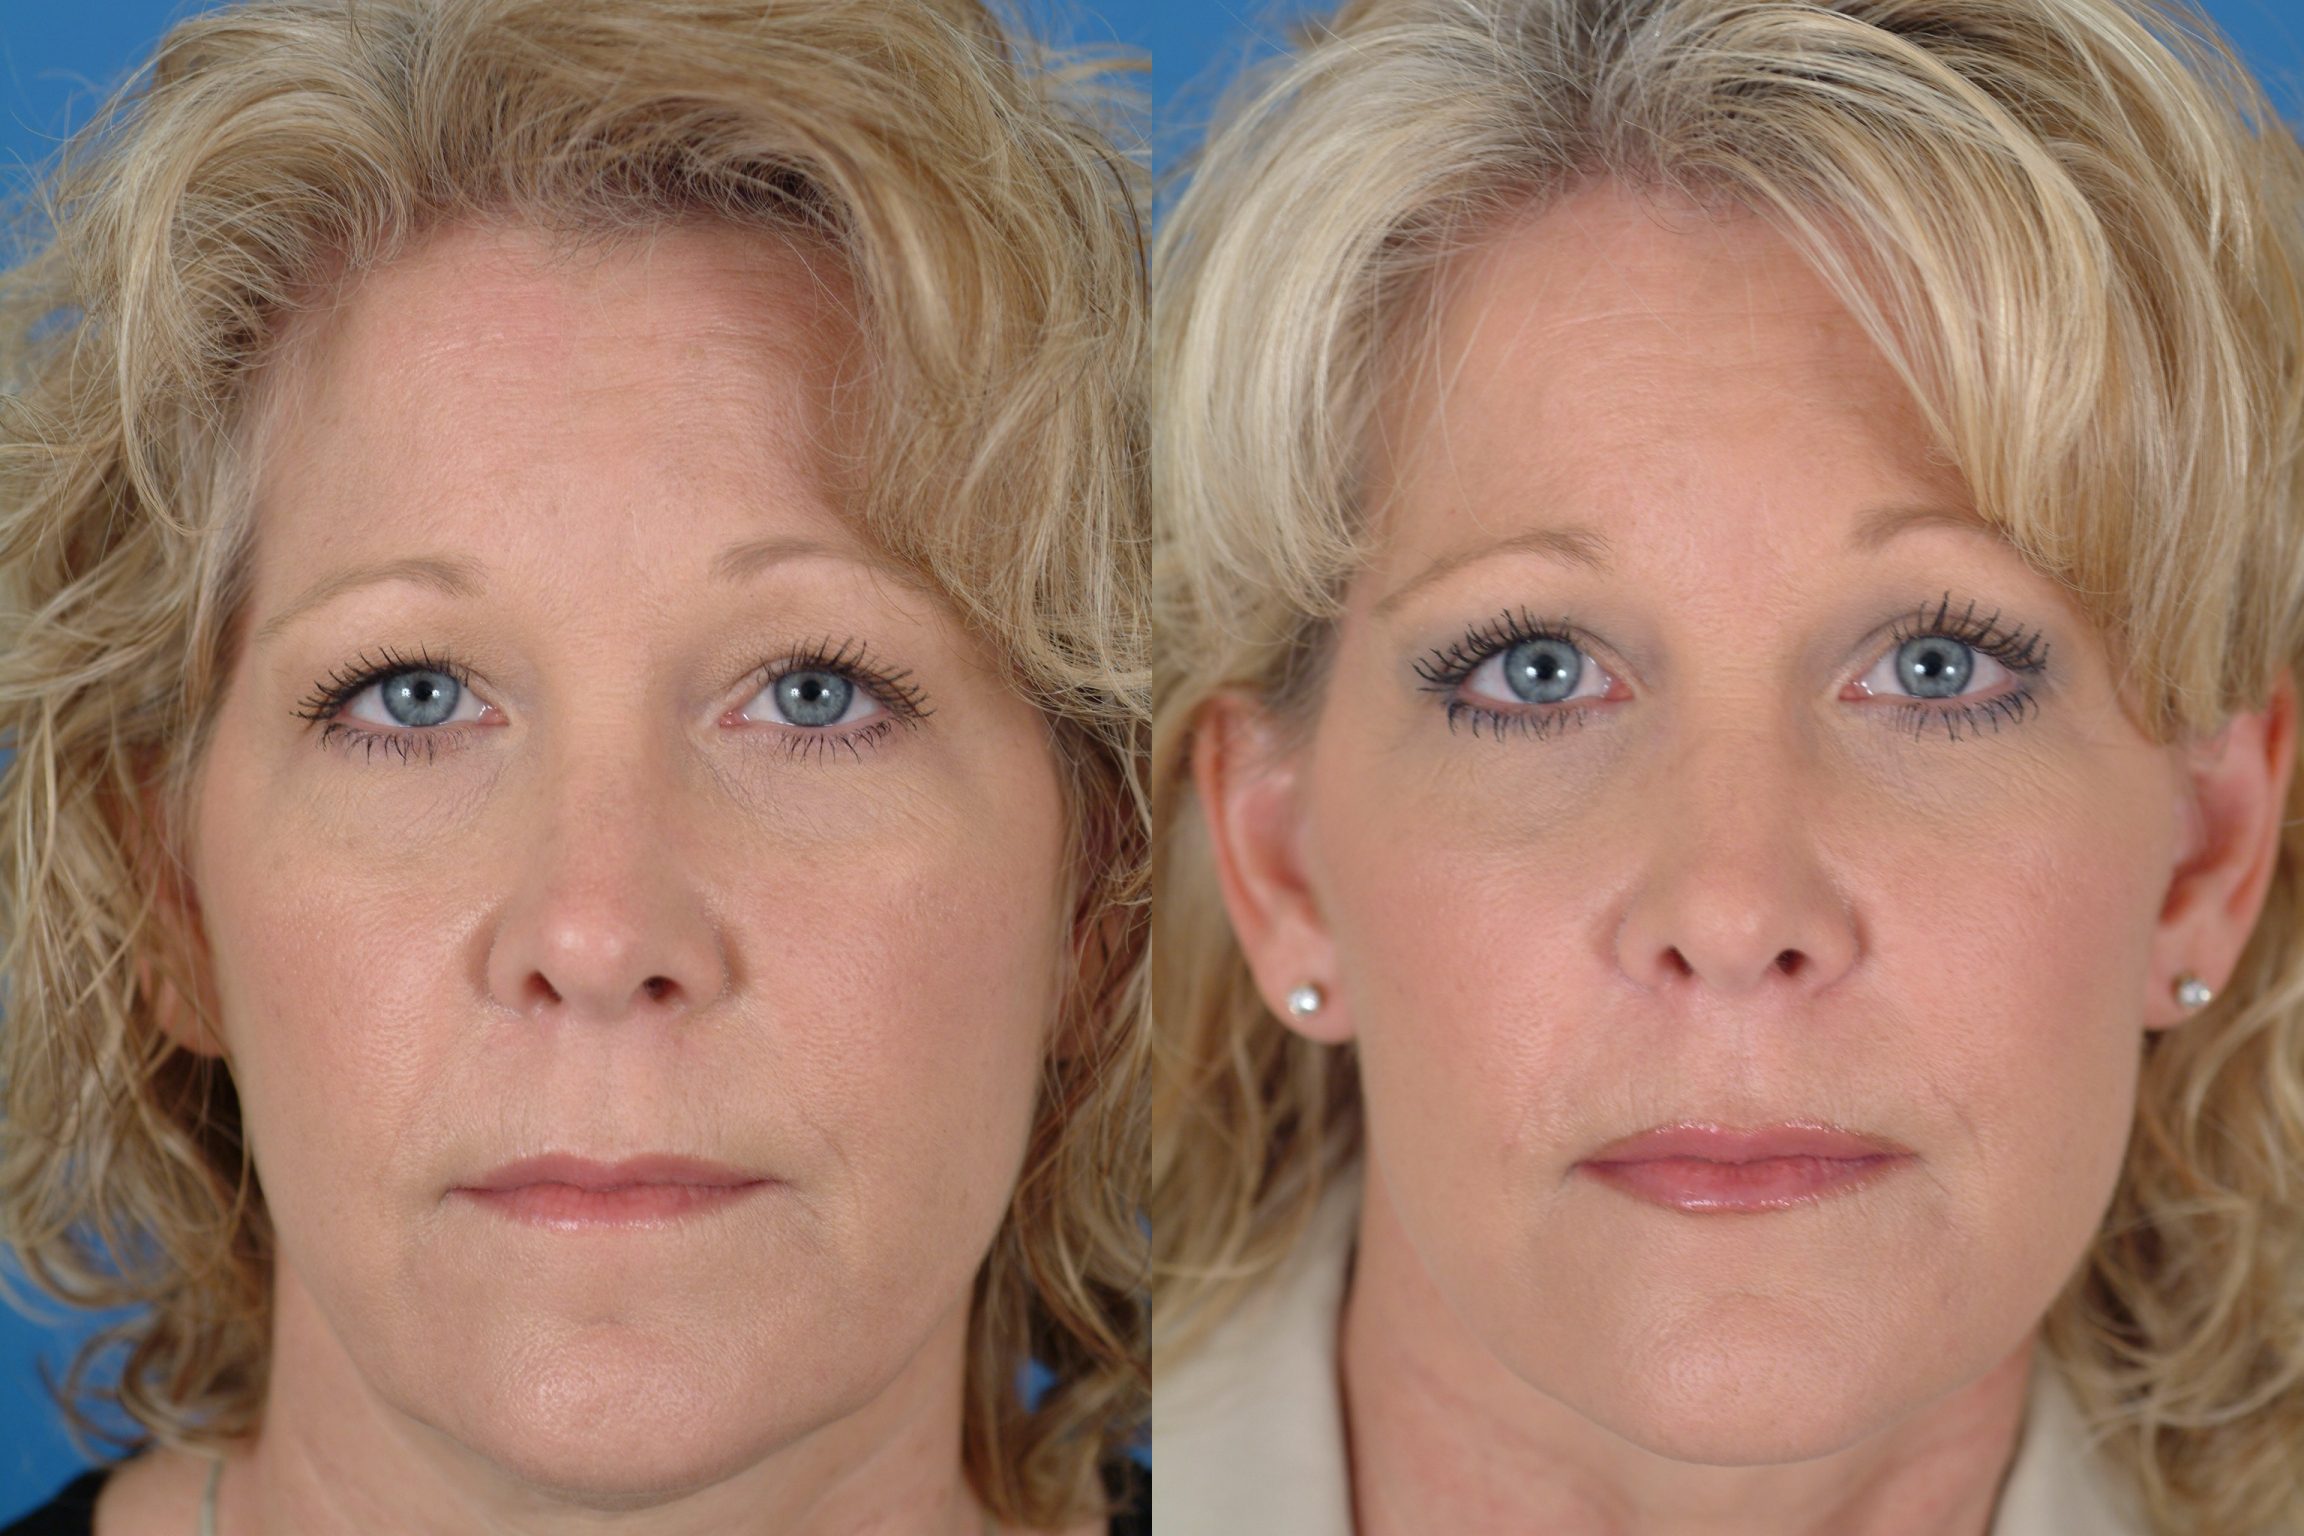 Facelift Before & After Photos.